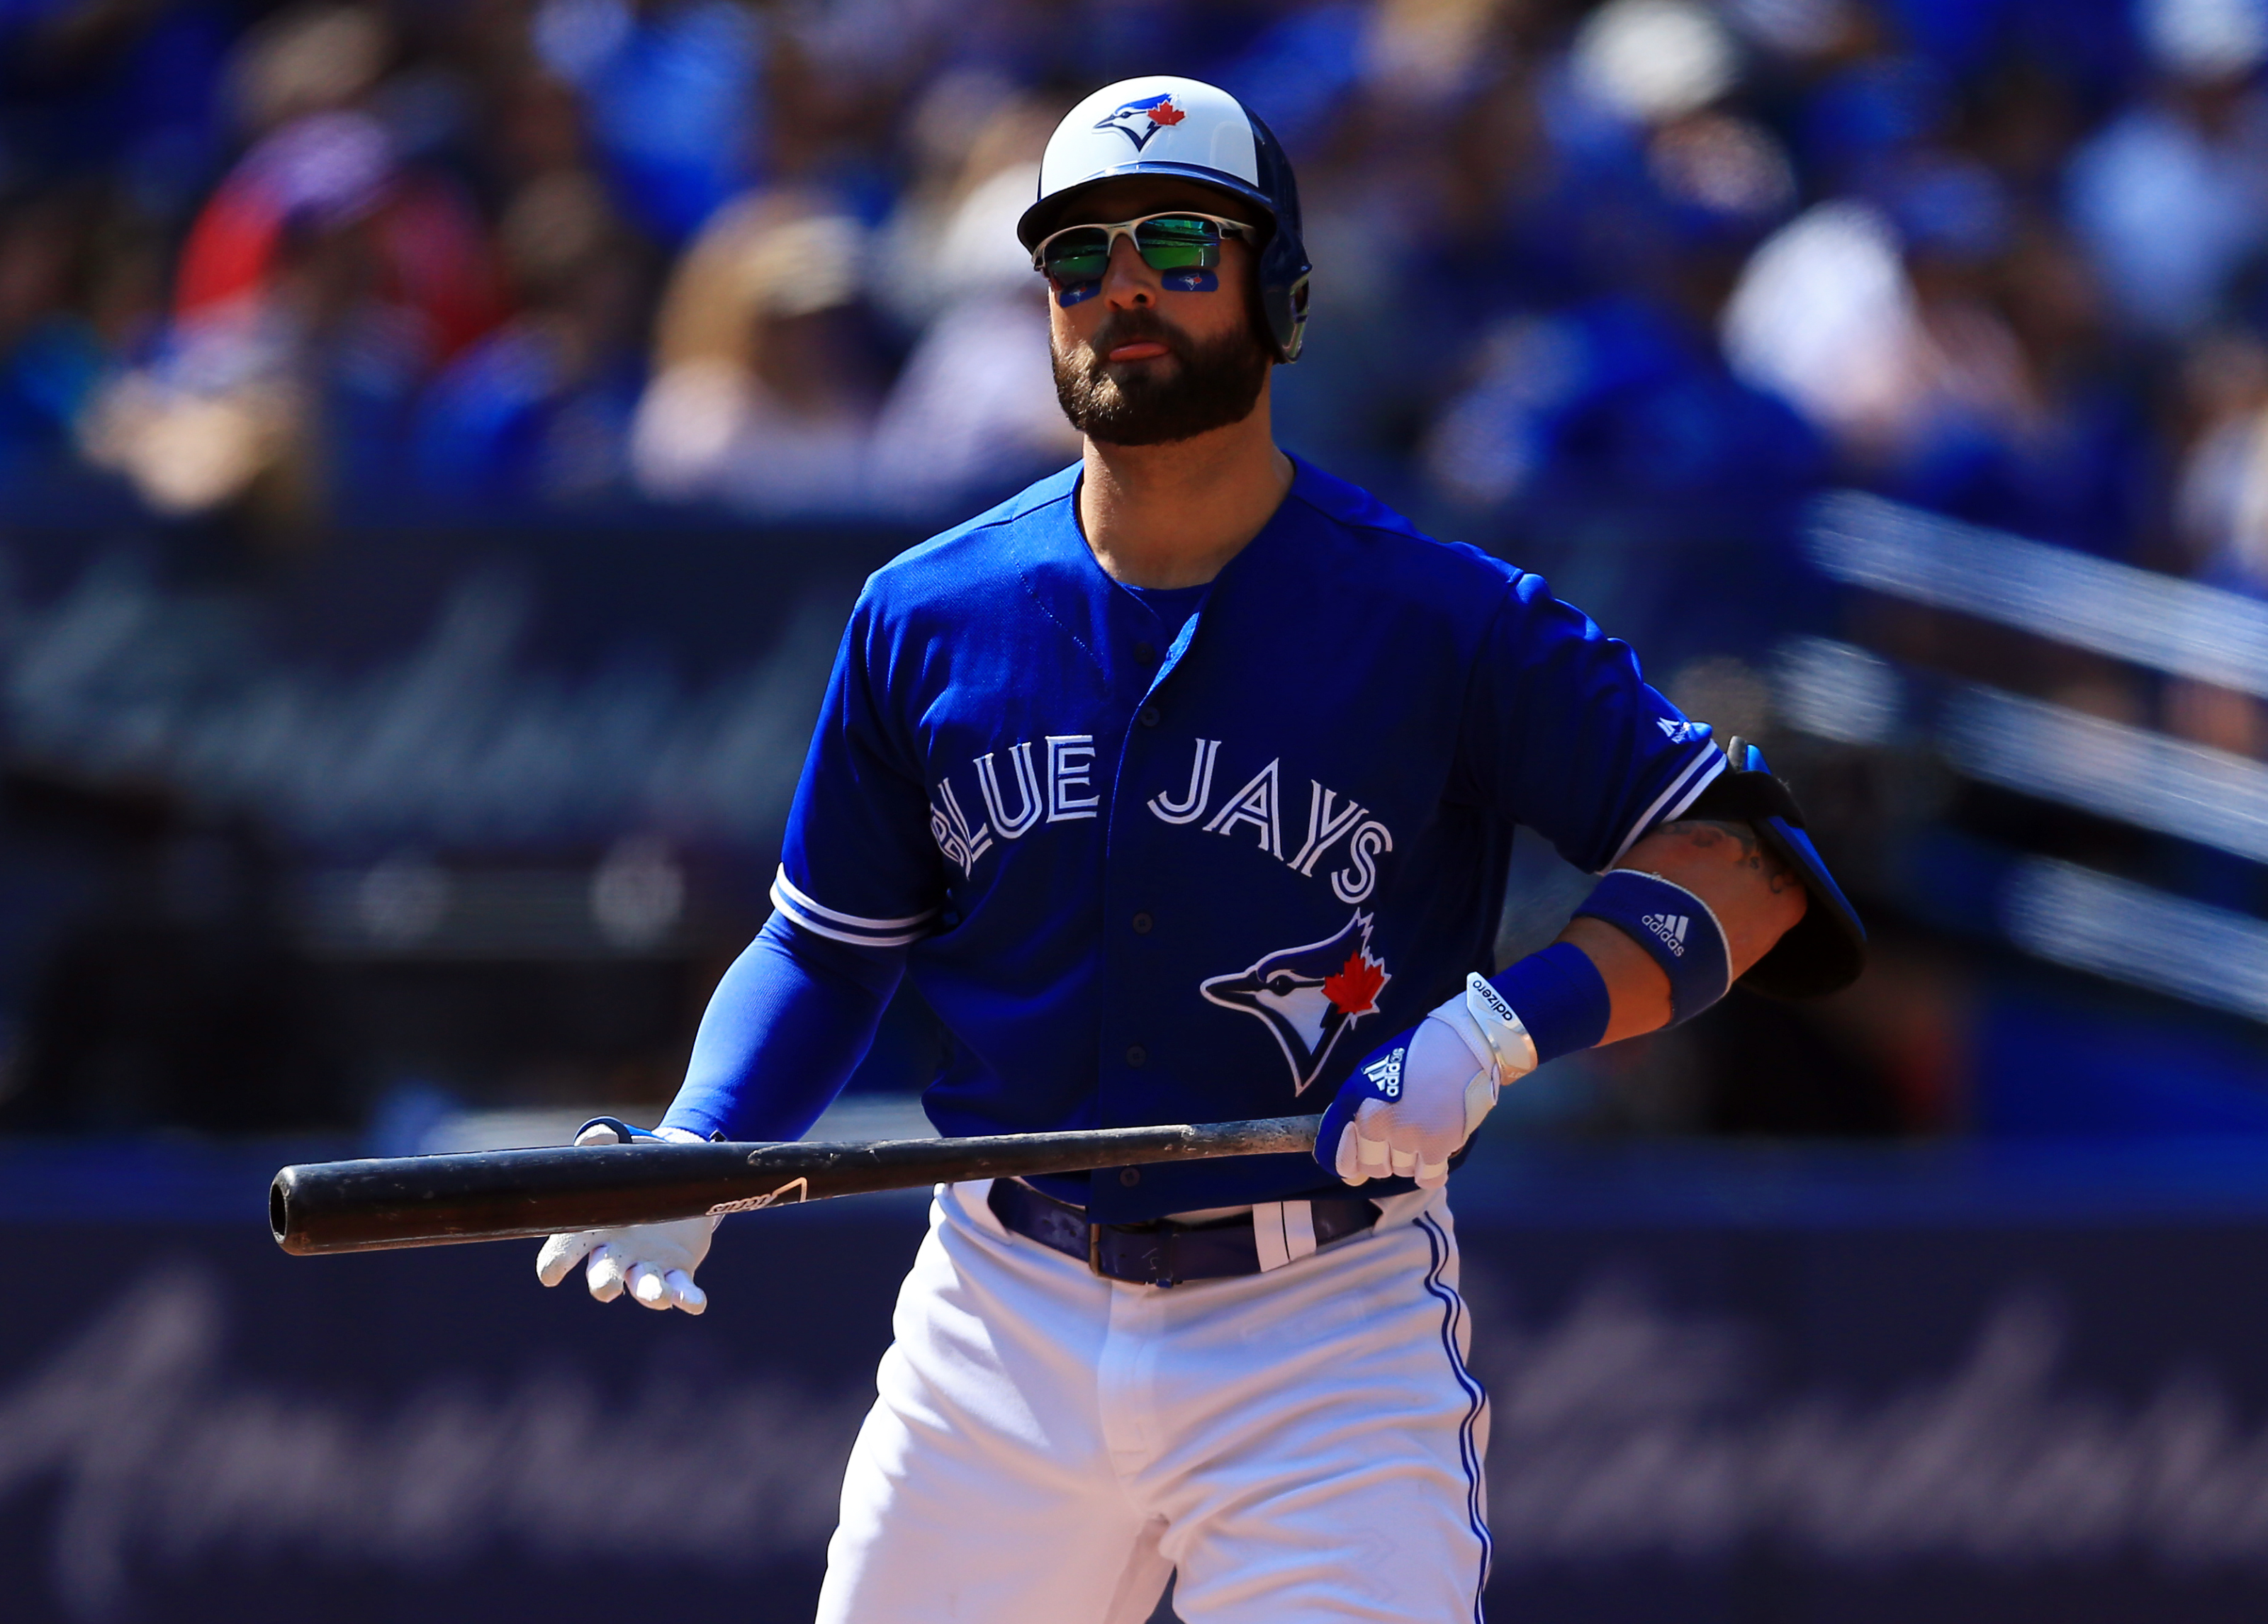 Toronto Blue Jays: Kevin Pillar adds to injury woes